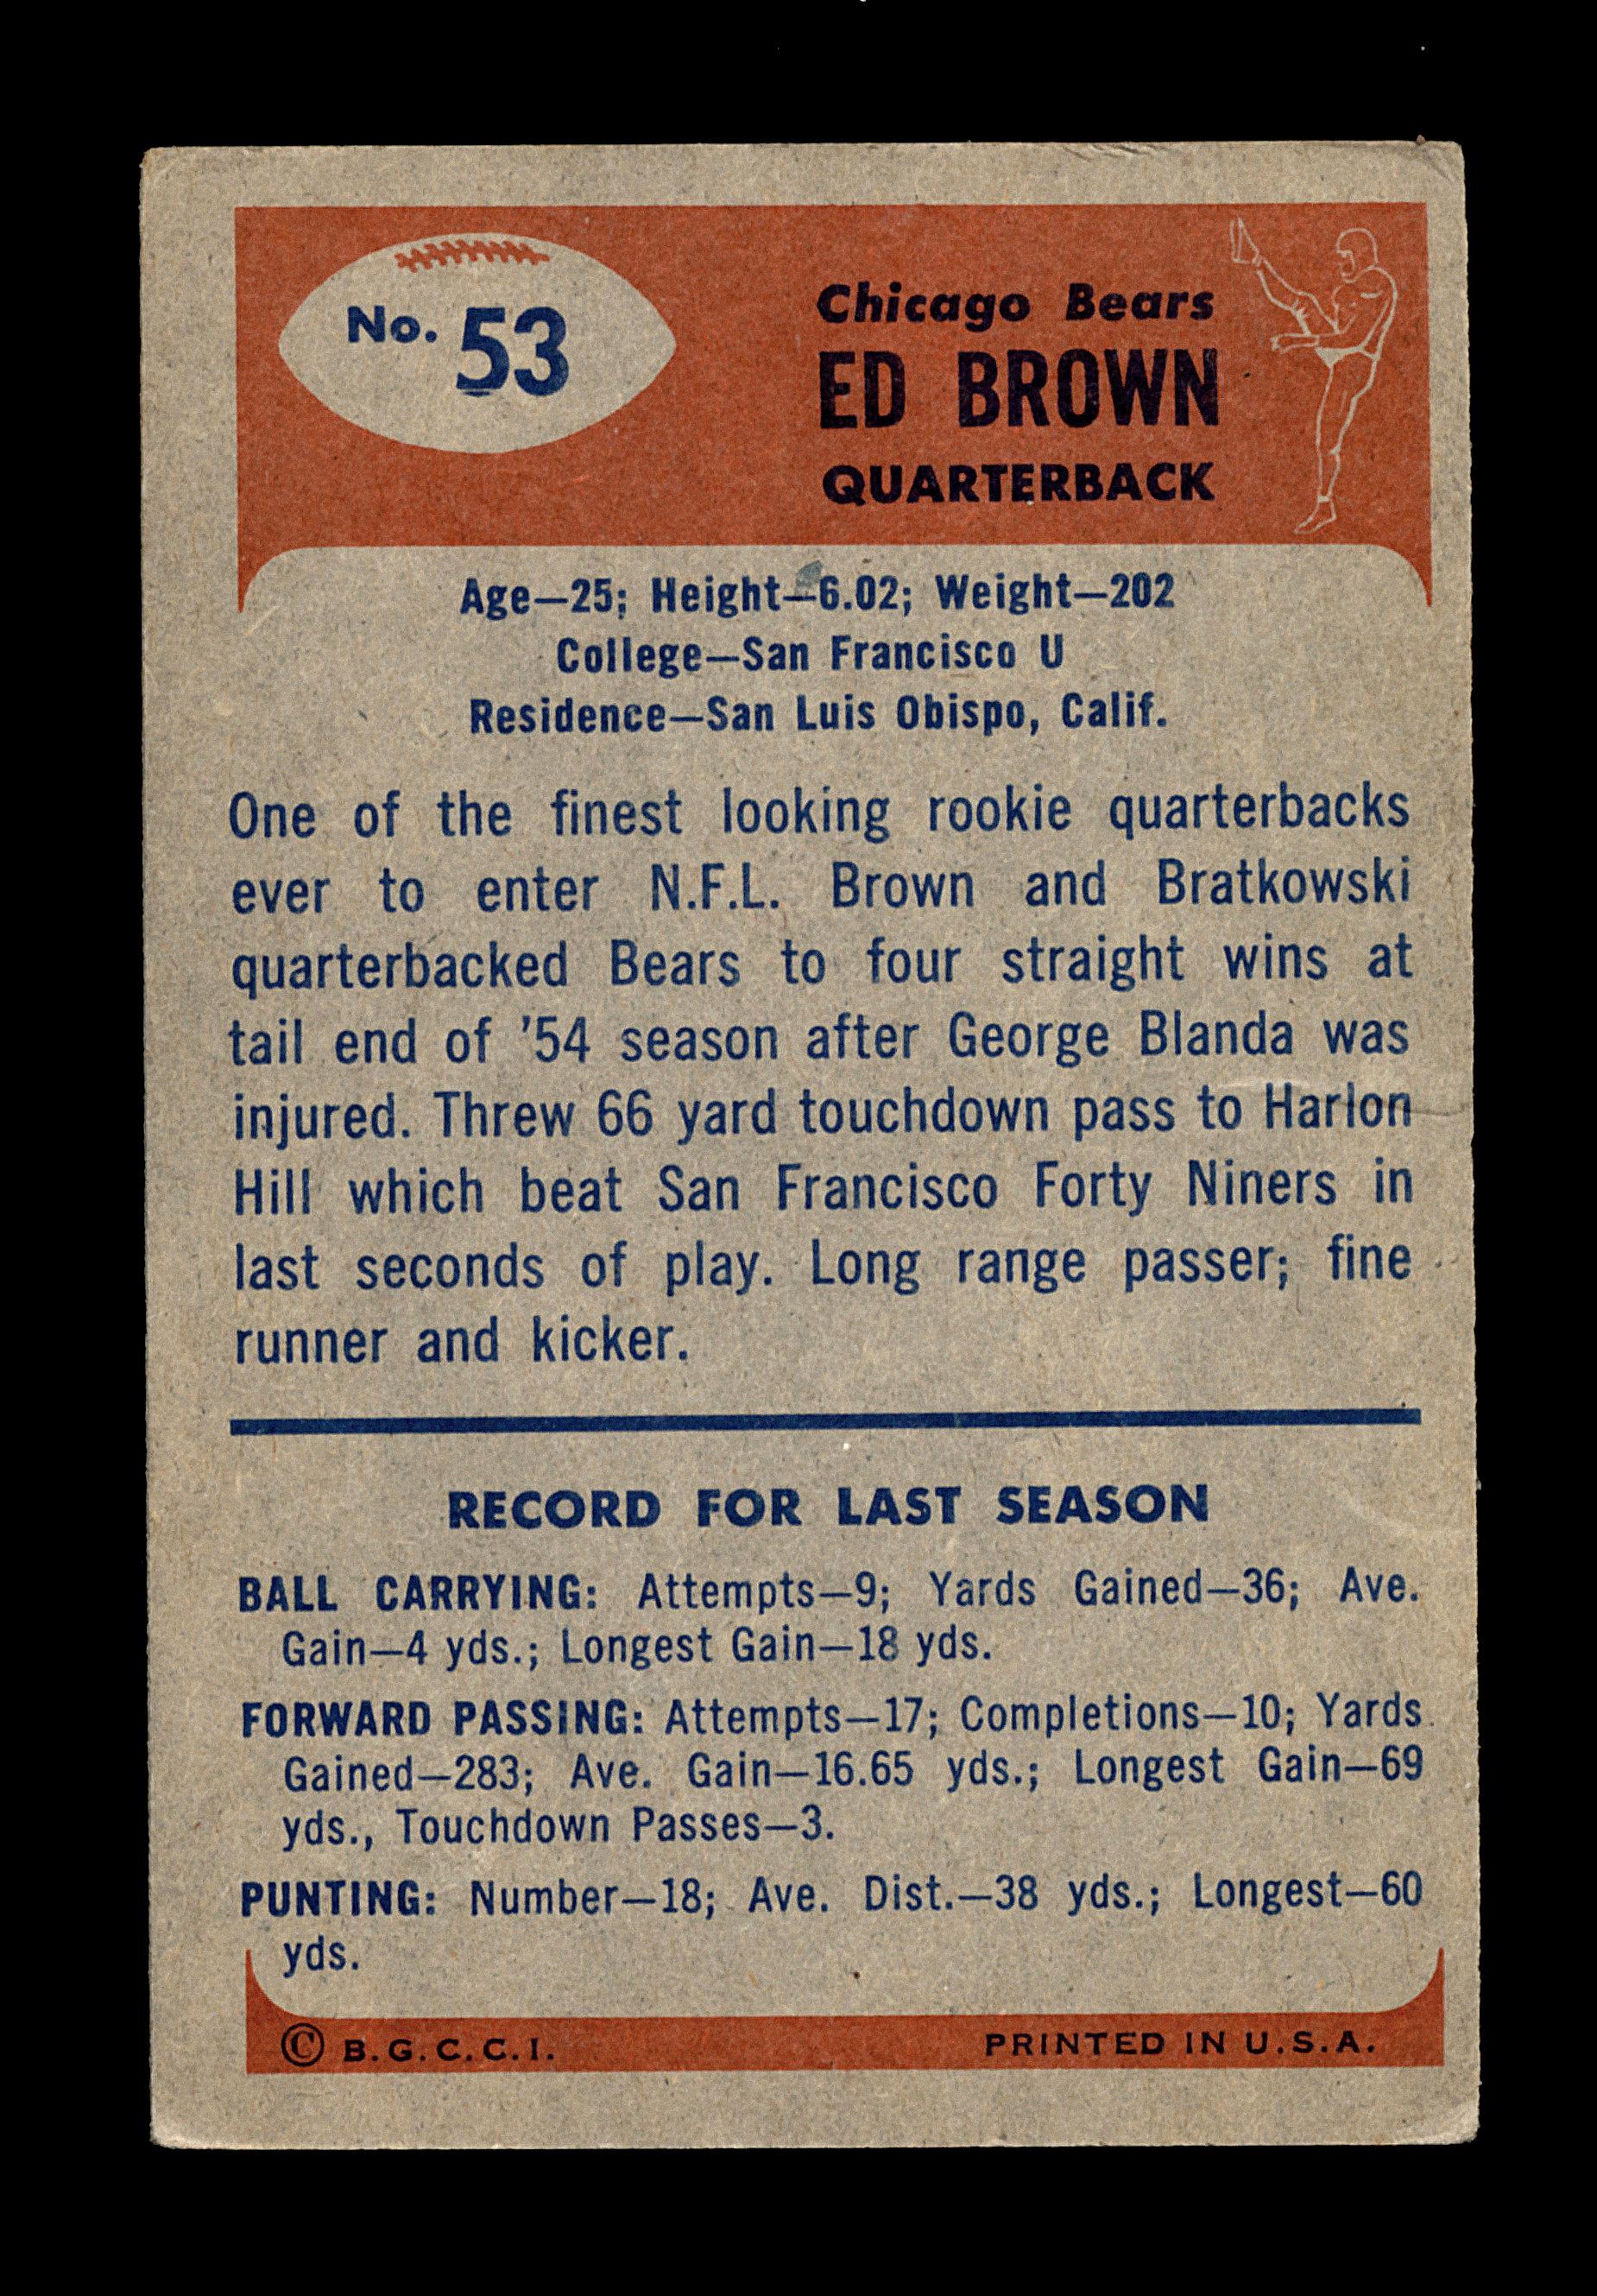 1955 Bowman ROOKIE Football Card #53 Rookie Ed Brown Chicago Bears. Has Cre